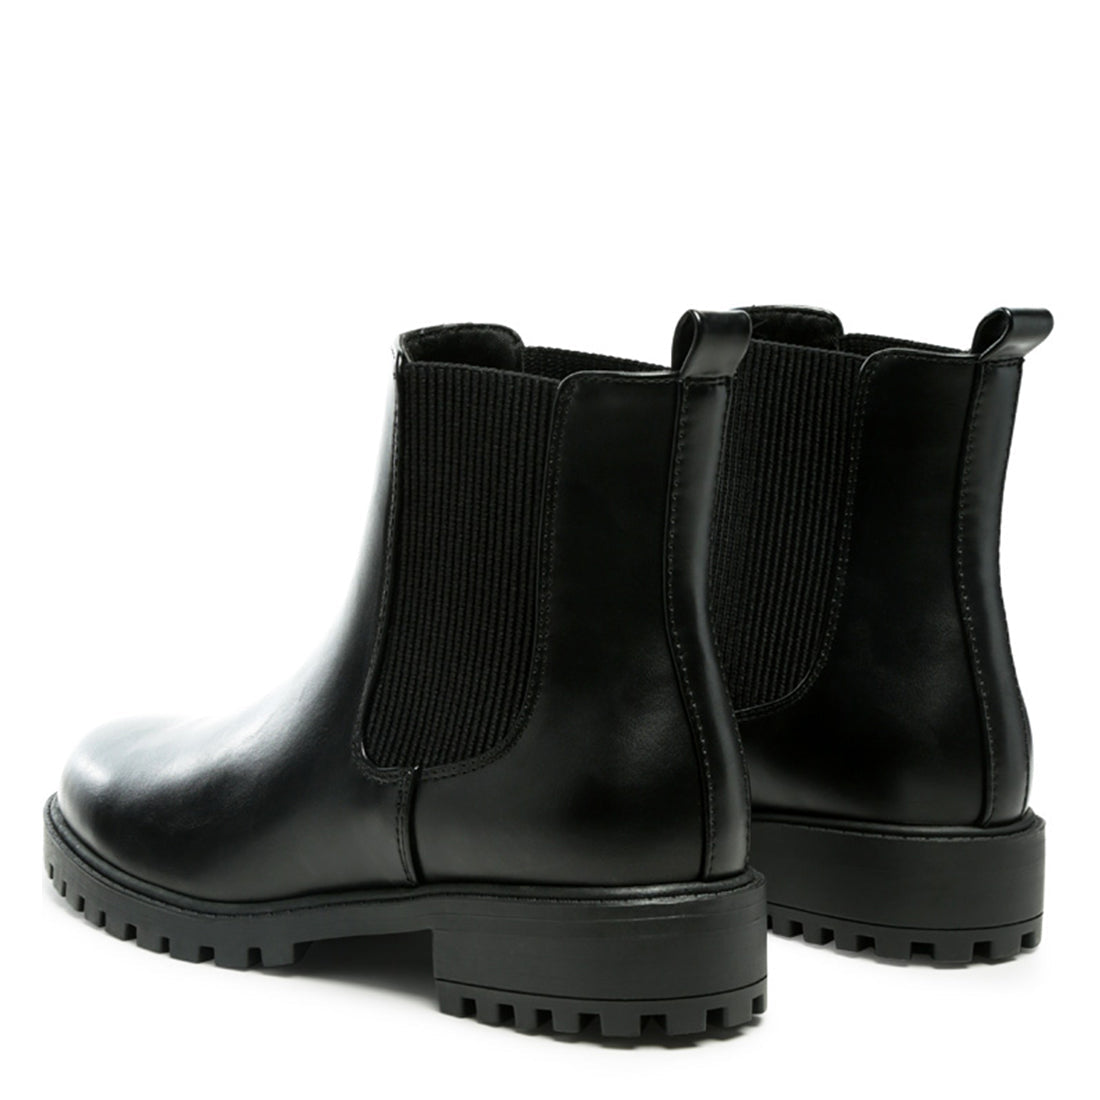 Chelsea Styled Ankle Boot in Black - UK4